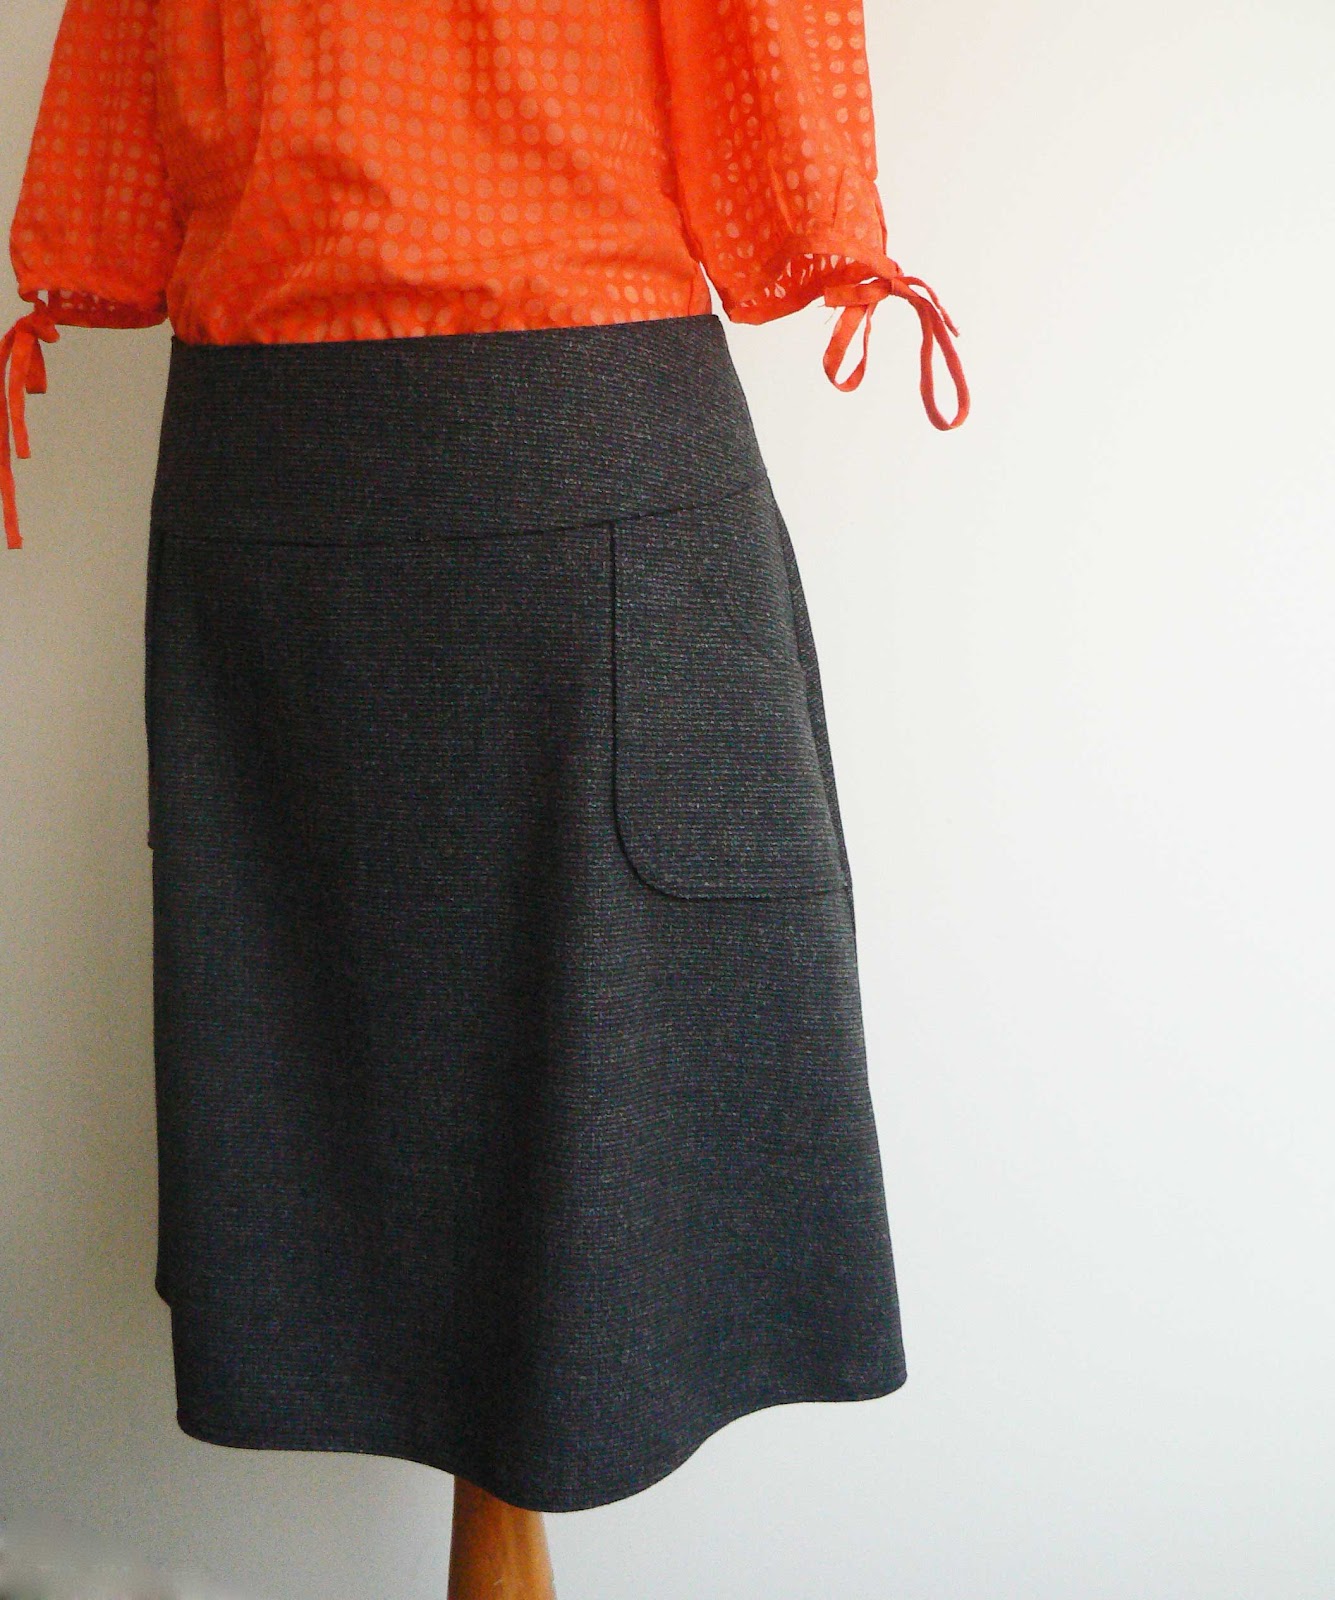 CurlyPops: The Make It In May Skirt Sew-Along - Here's mine!